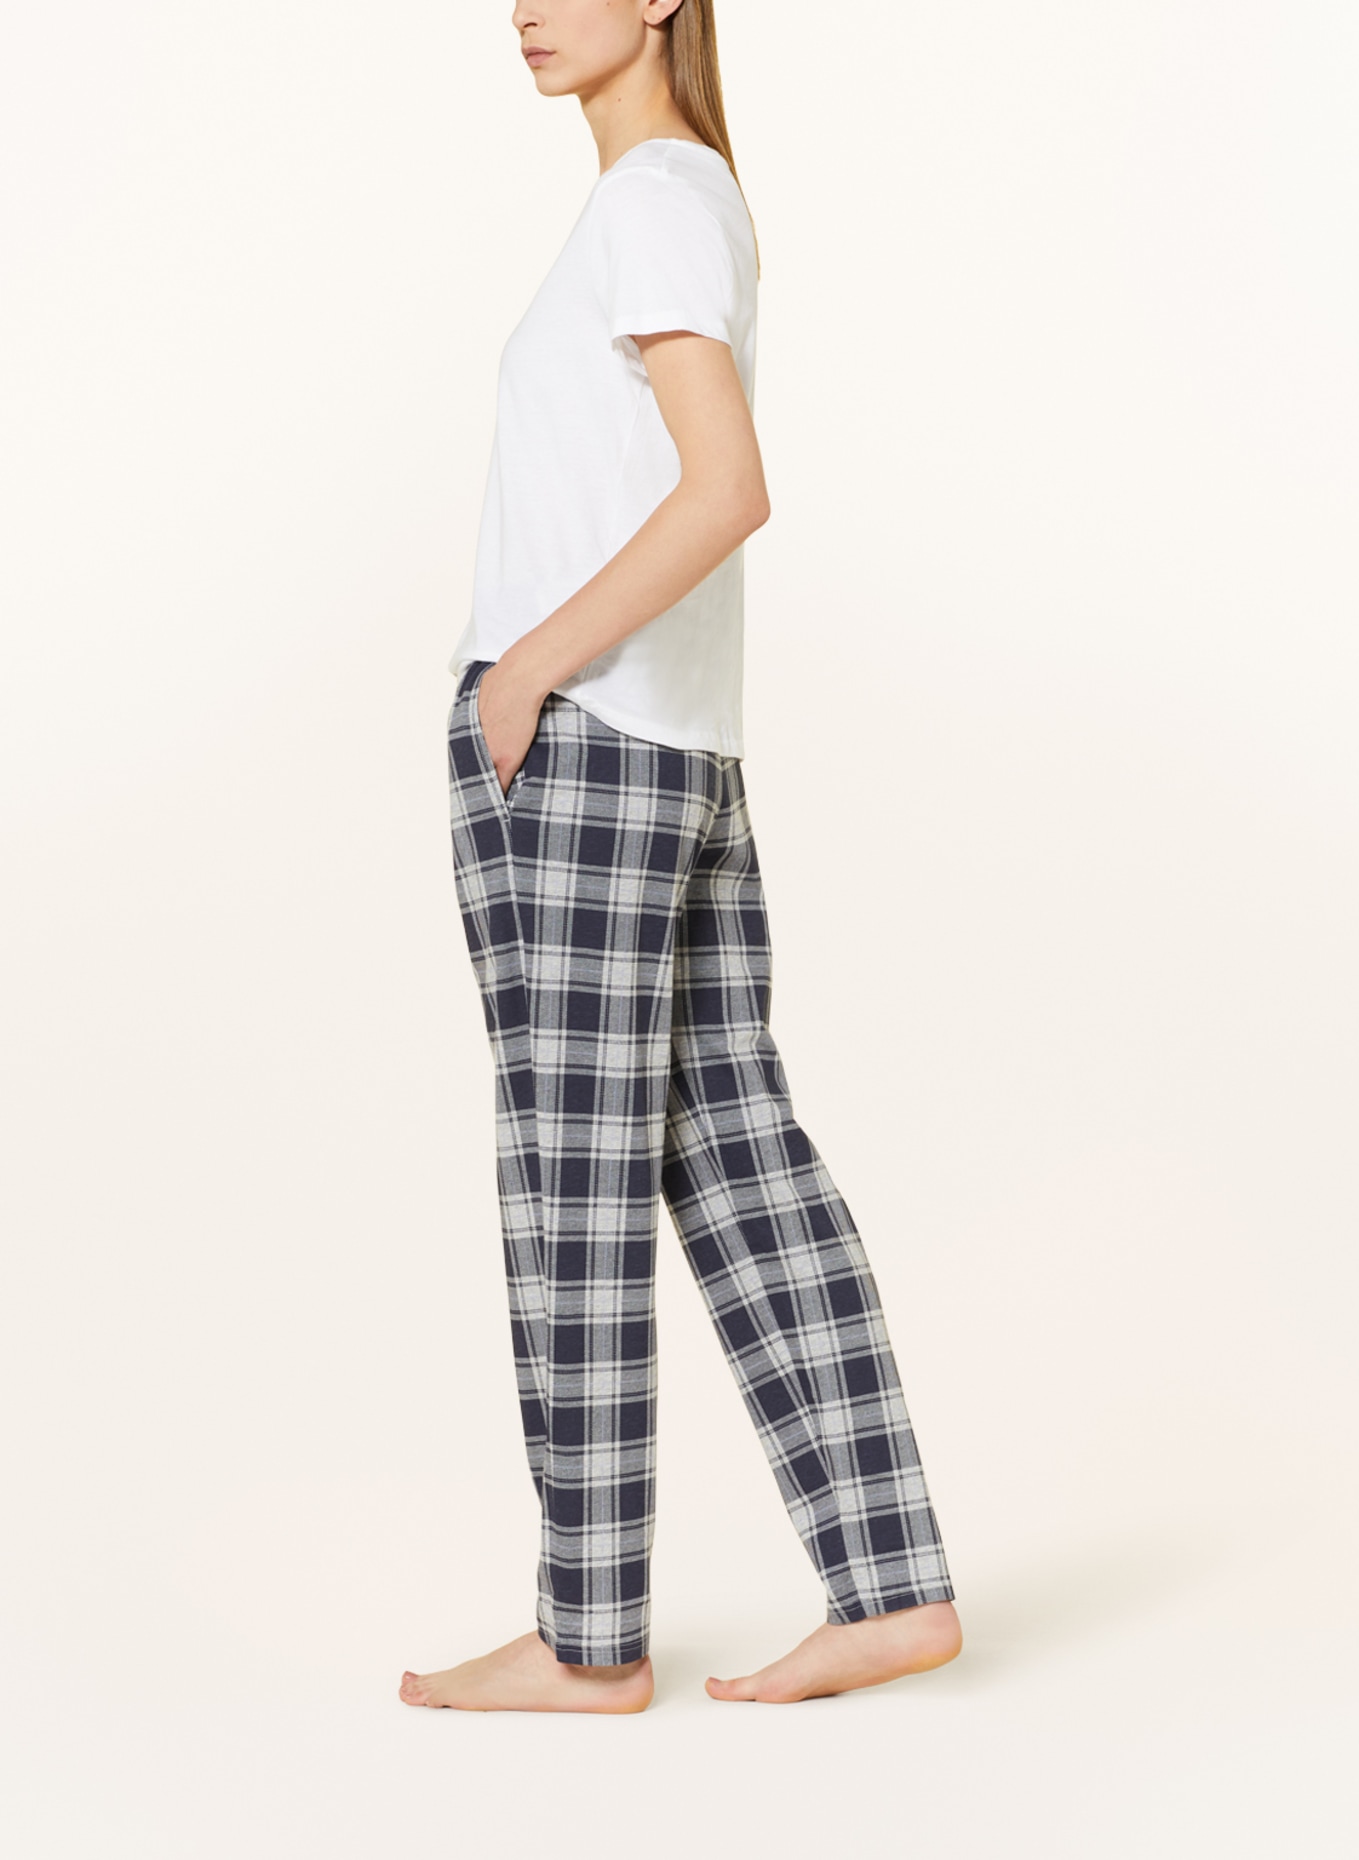 SCHIESSER Pajama pants MIX+RELAX in blue/ light blue